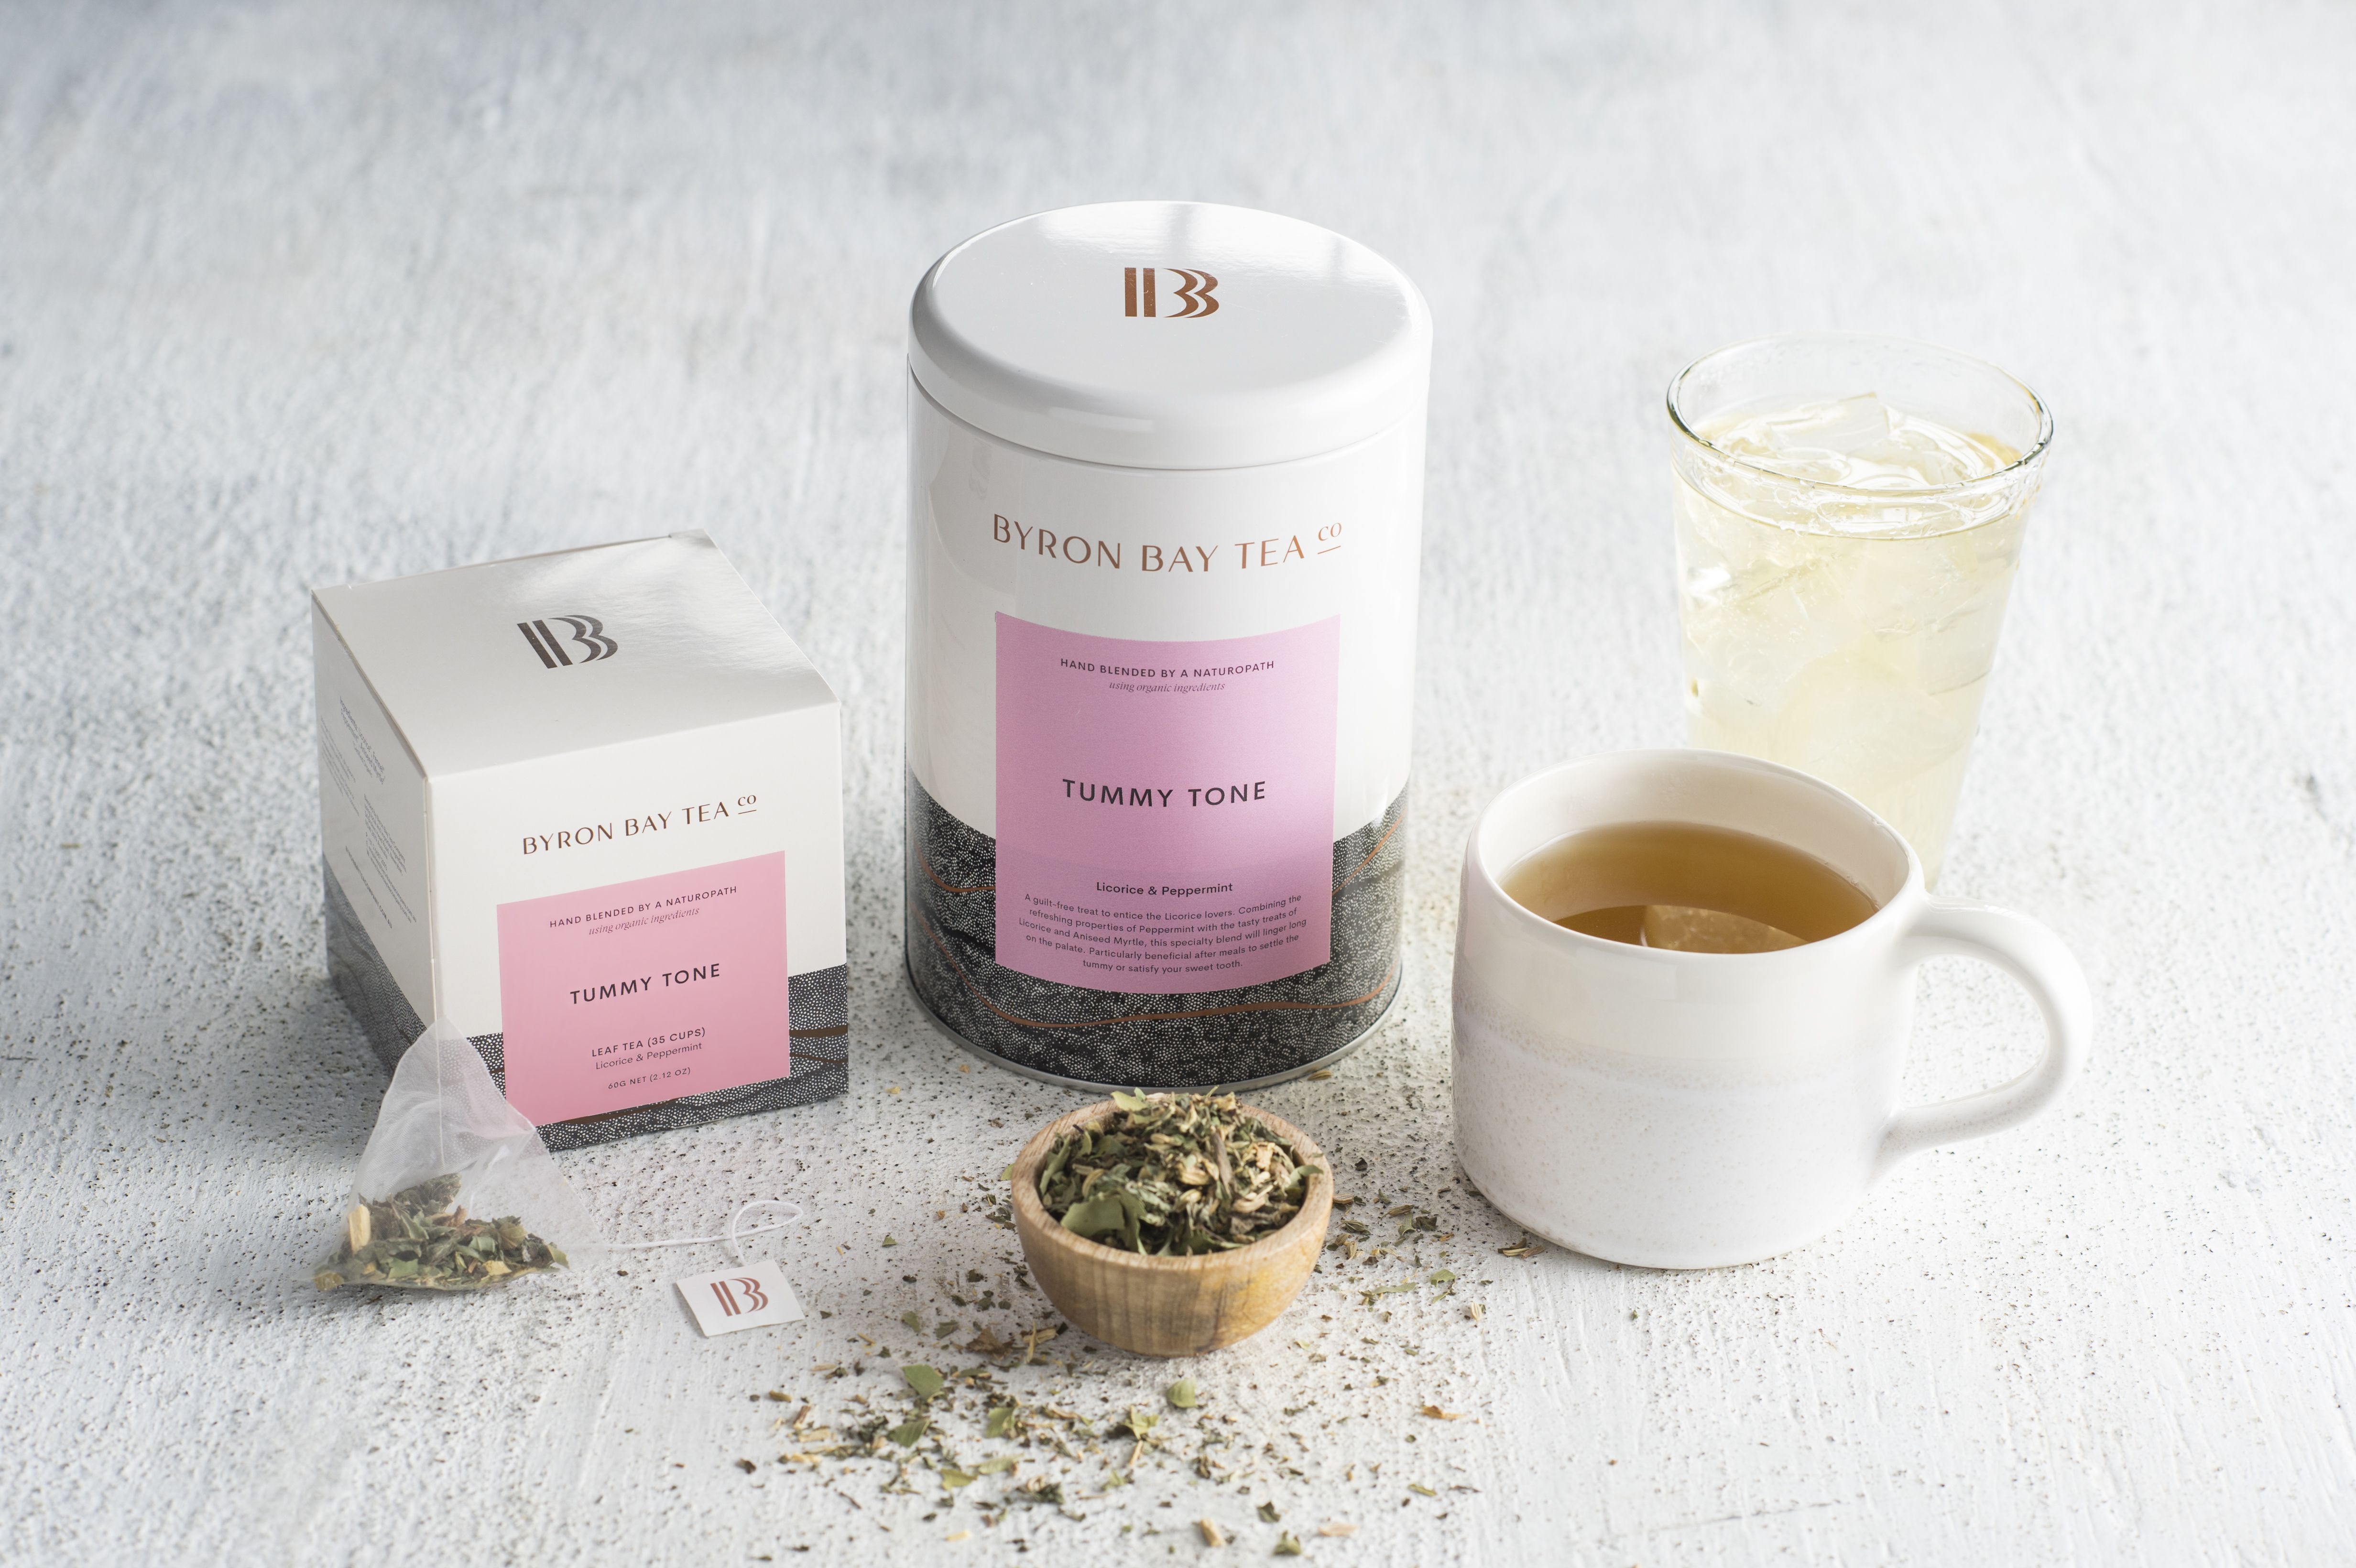 box and tin of byron bay tea company tummy tone tea with teabag and tea leaf in the foreground with organic cashmere mug with brewed tea and glass of. iced tea in the background on stone backdrop